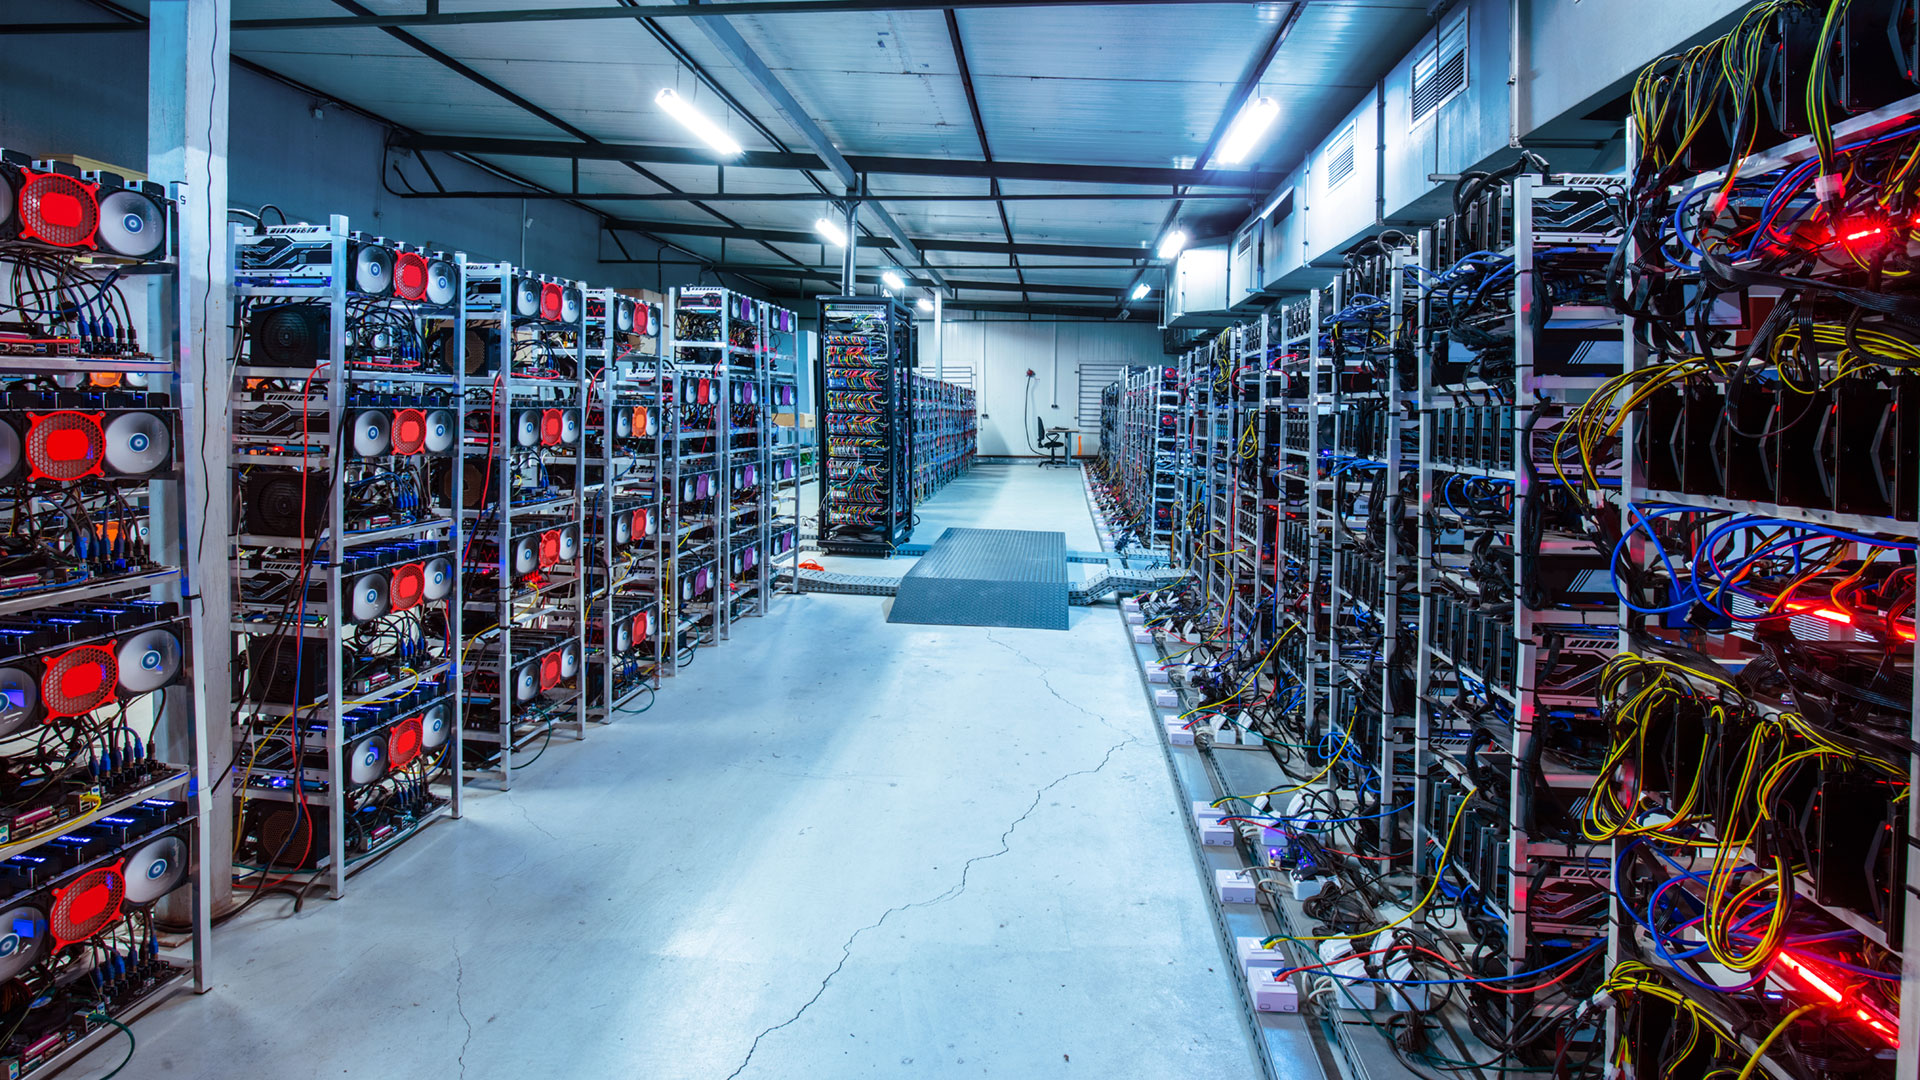 We present you the best place to buy asic miners